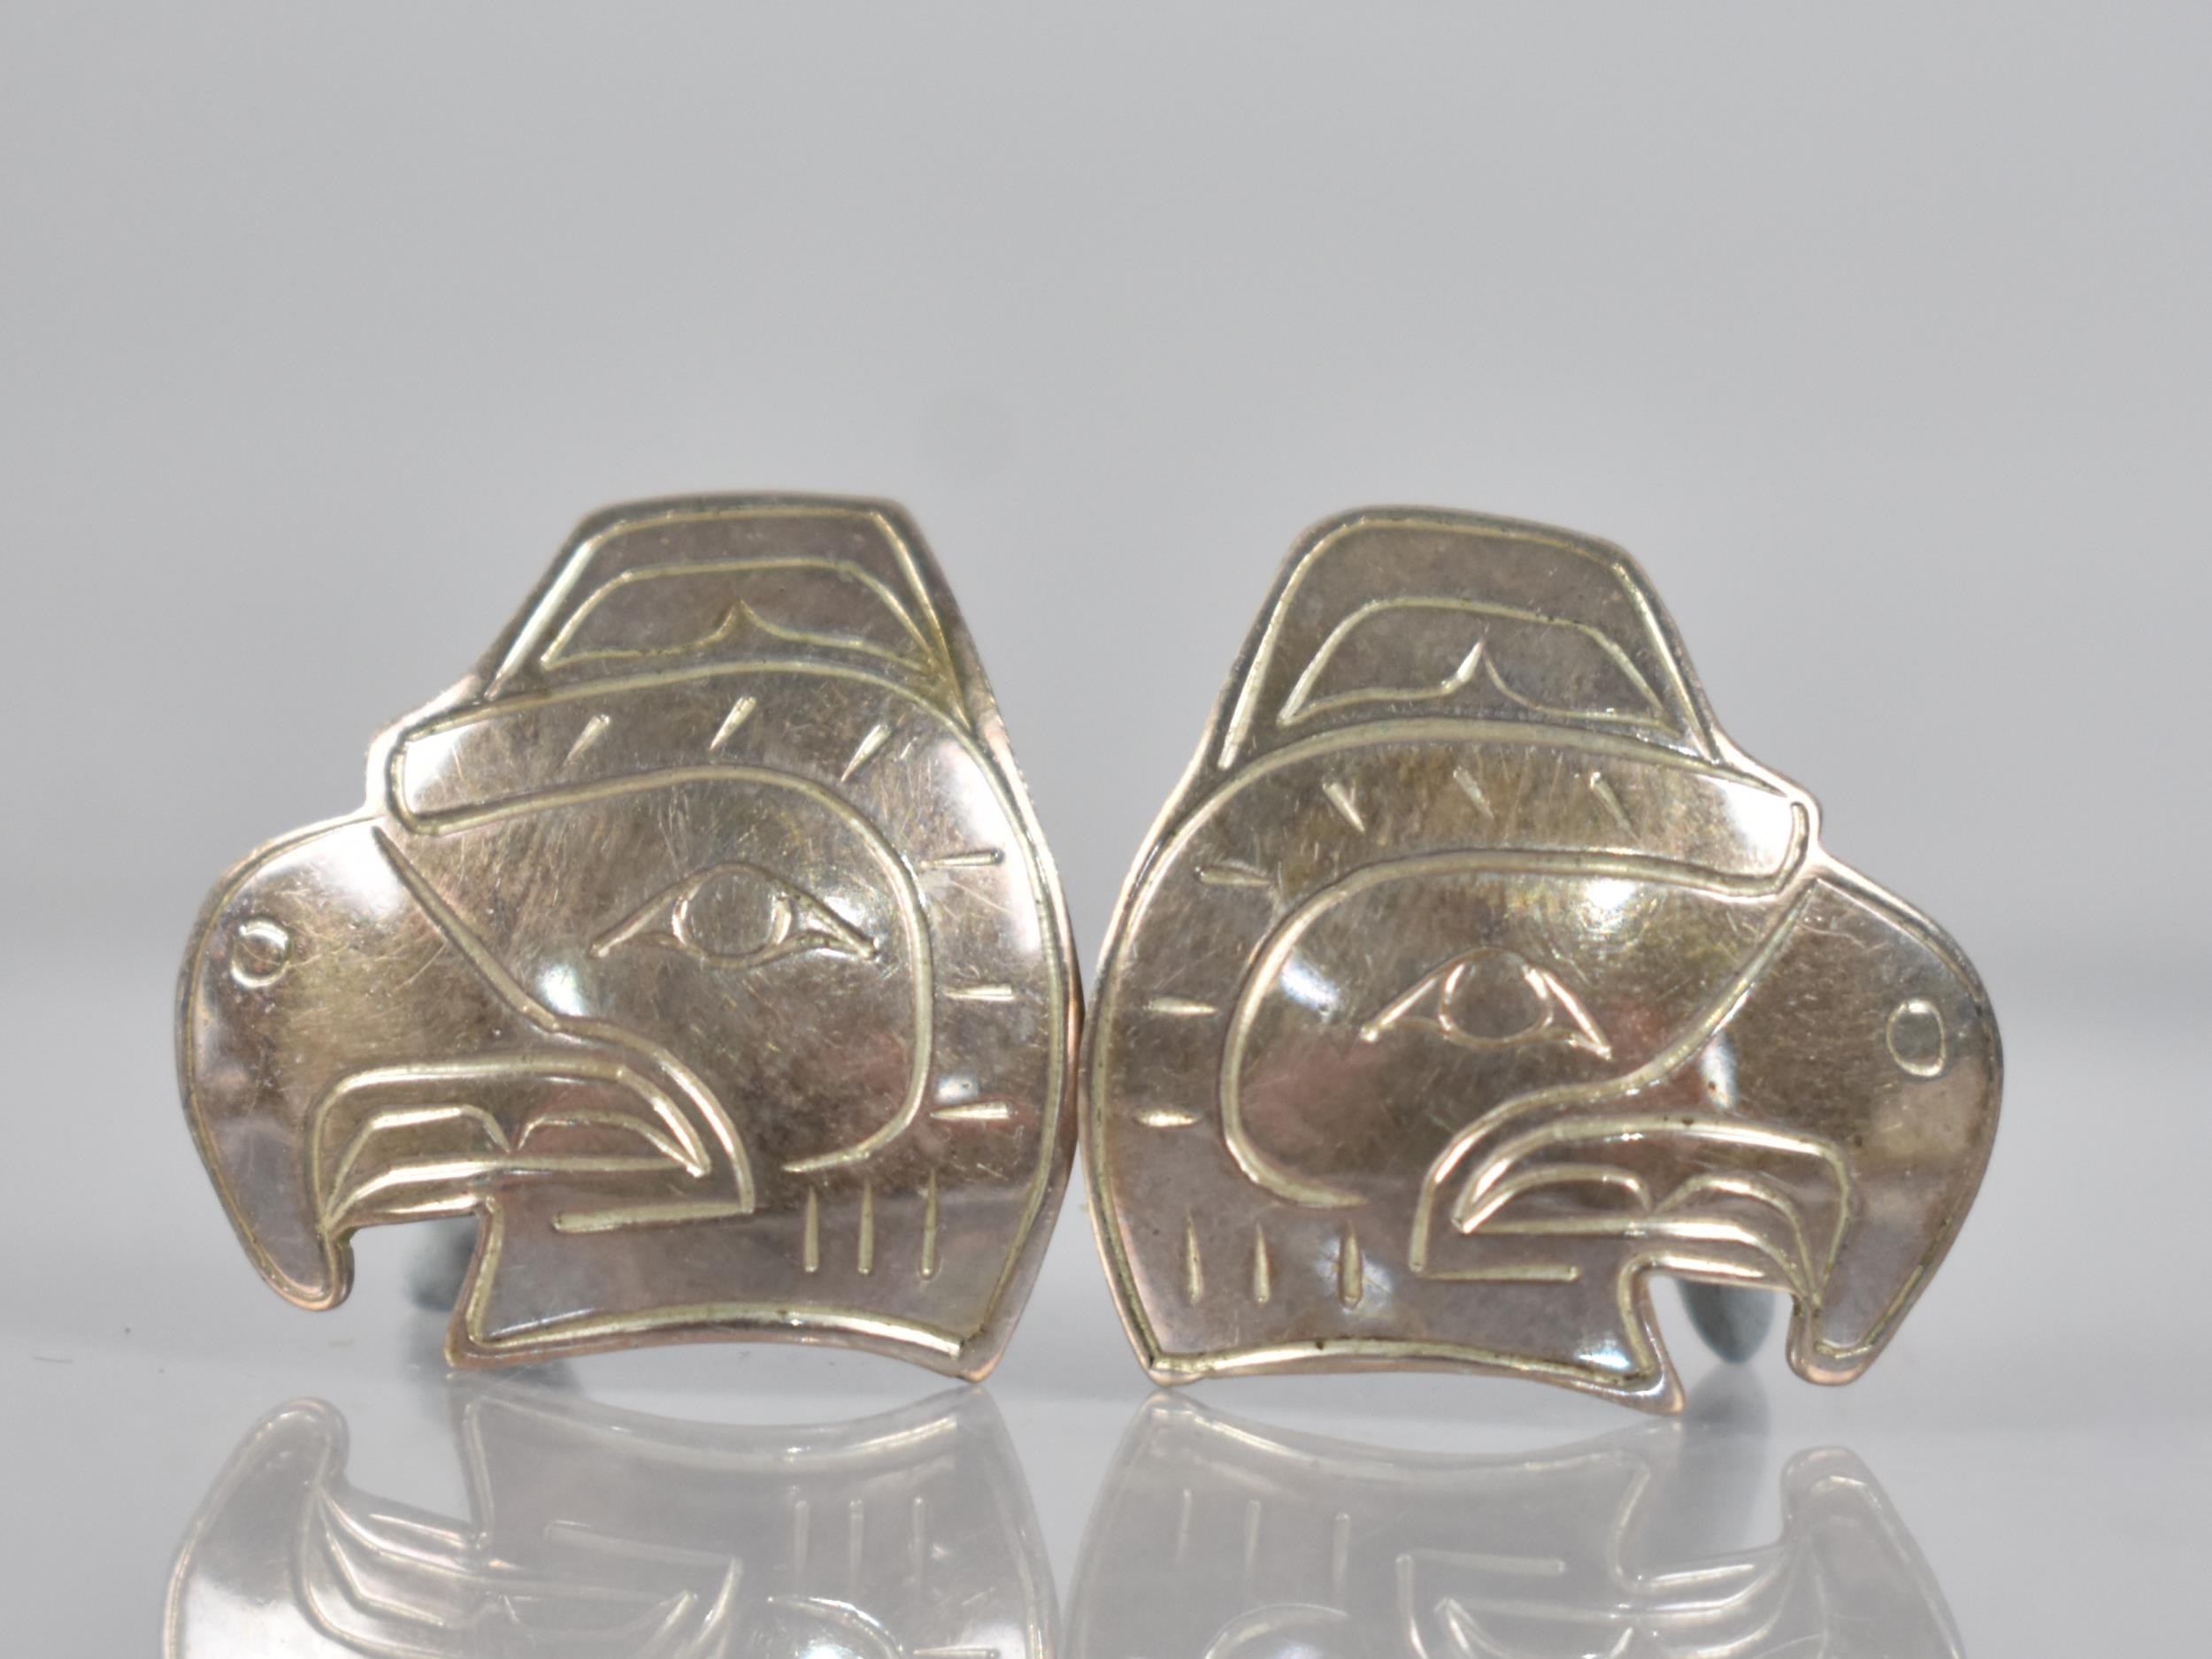 A Pair of Signed Native American/Canadian Eagle Head Earrings, 21mm Wide and 20.5mm High, Signed JP?